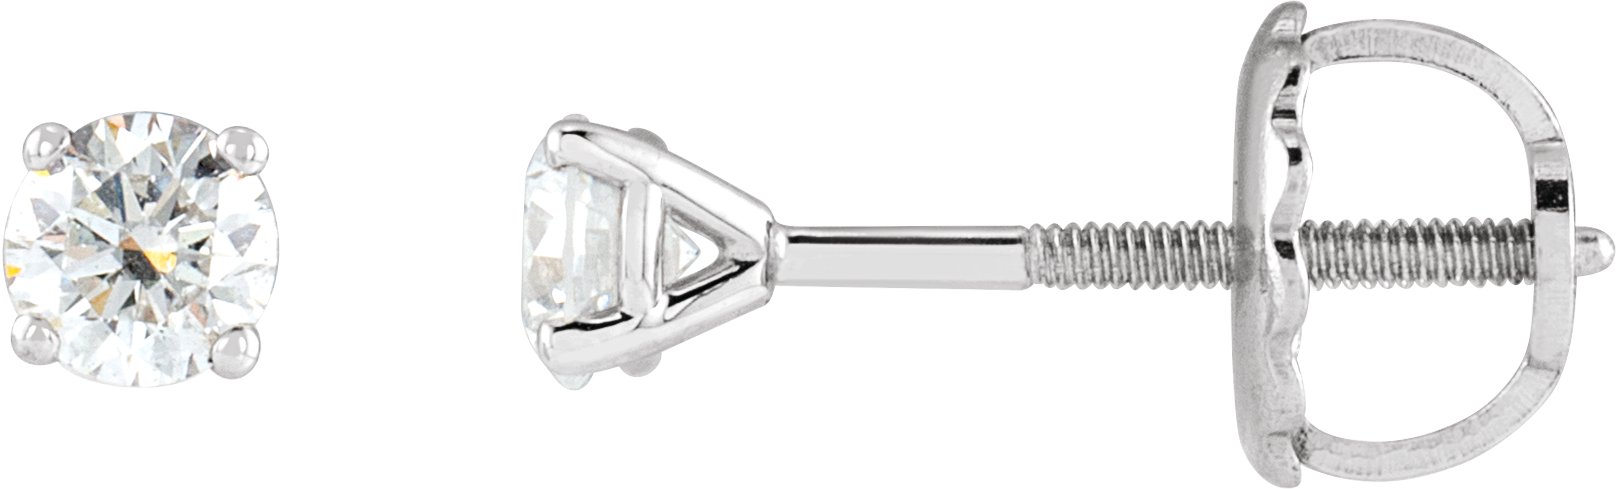 14K White 1/4 CTW Natural Diamond Cocktail-Style Earrings